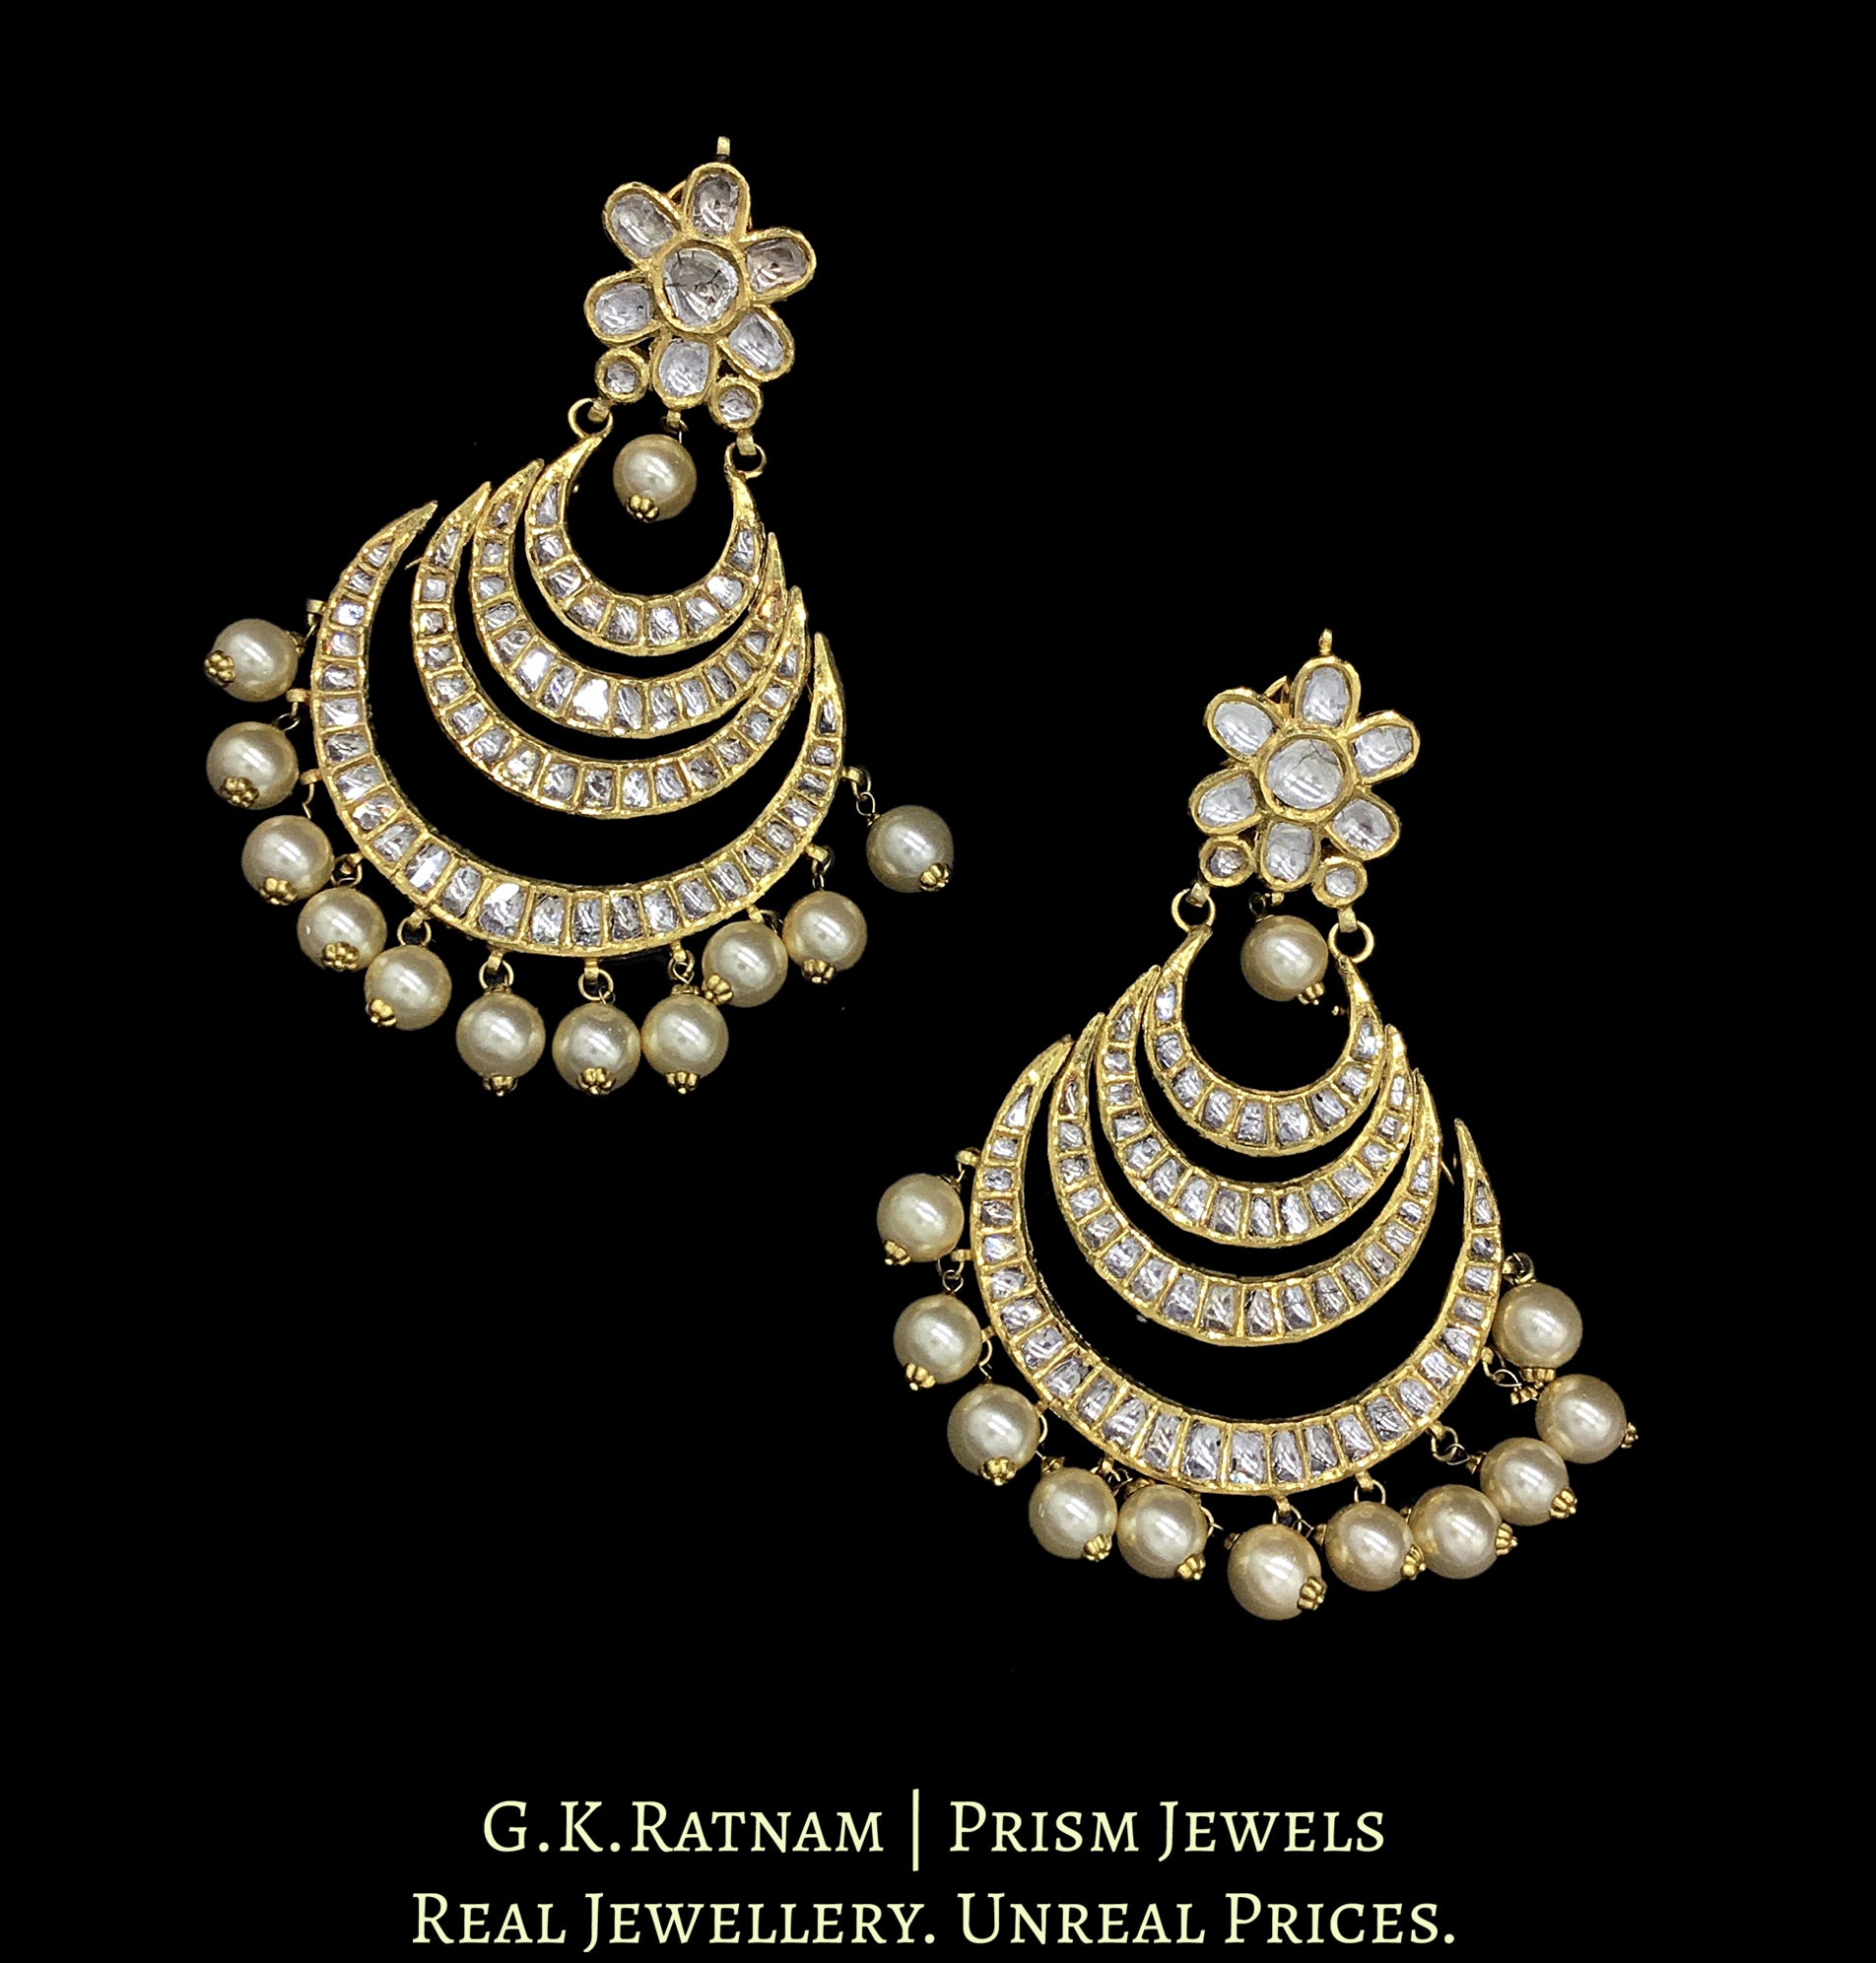 18k Gold and Diamond Polki Multi-tiered Chand Bali Earring Pair with south-sea grade shell pearls